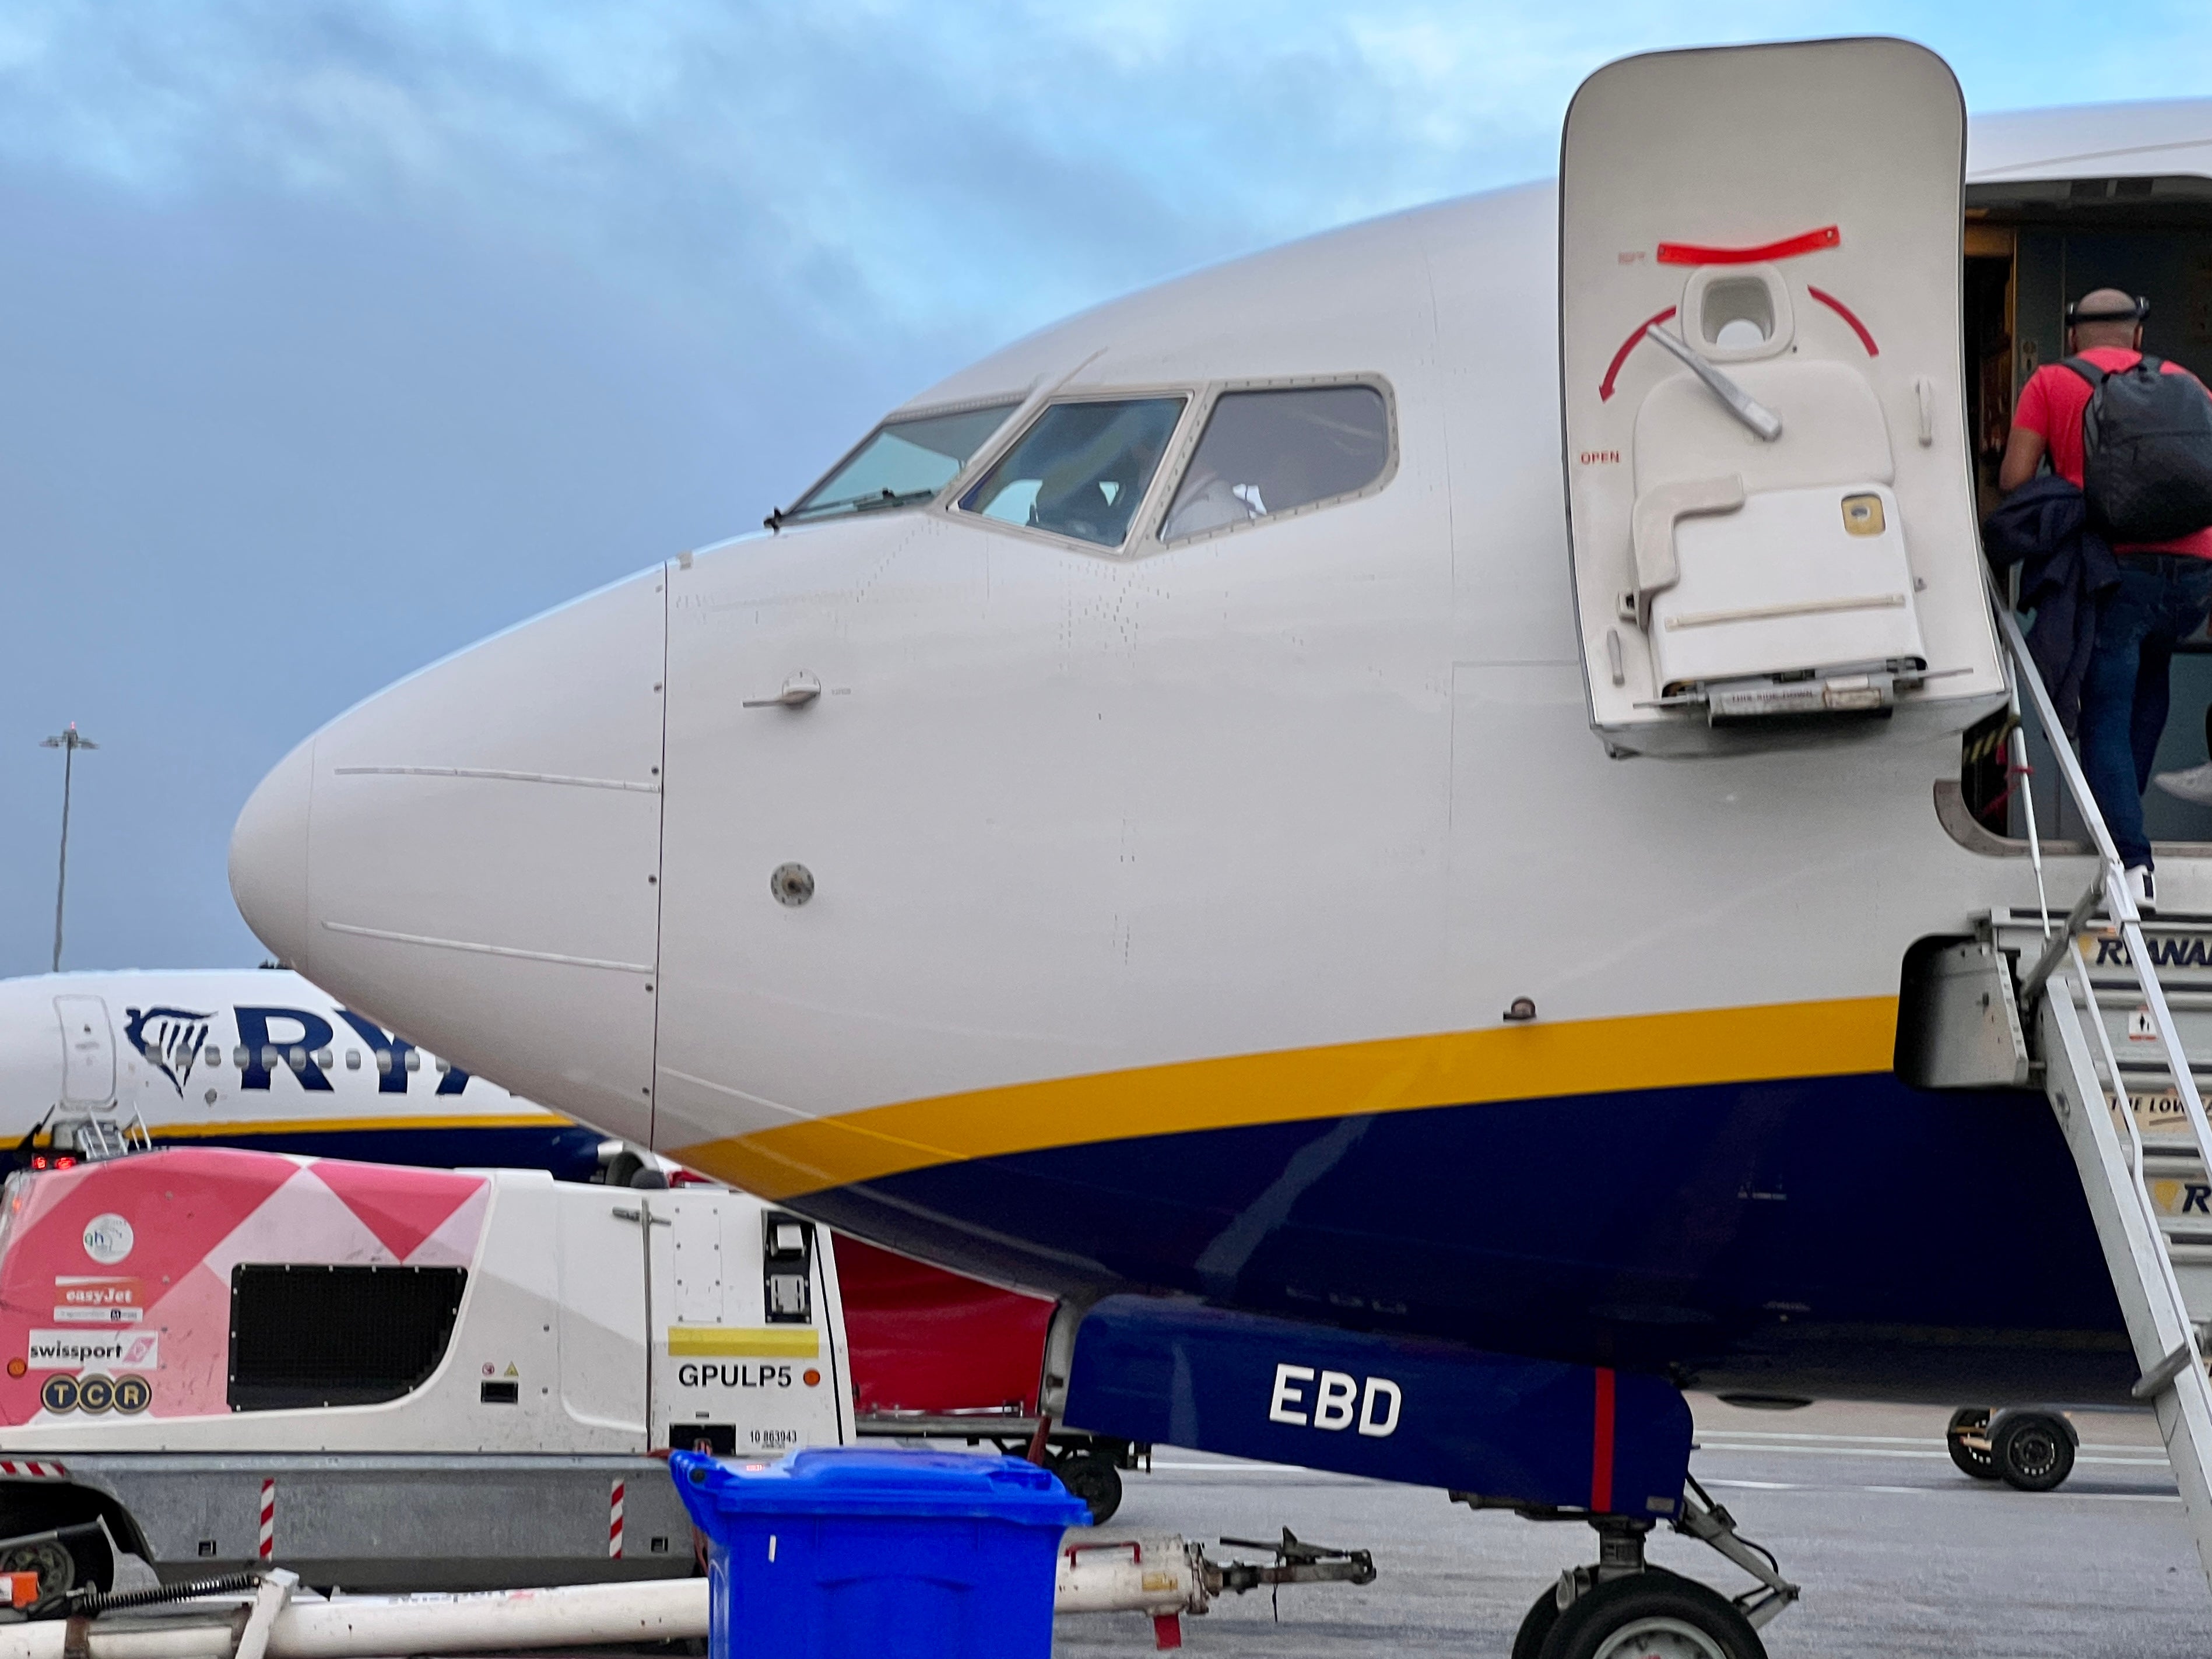 Escape route: the £12.99 Luton-Dublin flight that I took to begin my North American adventure